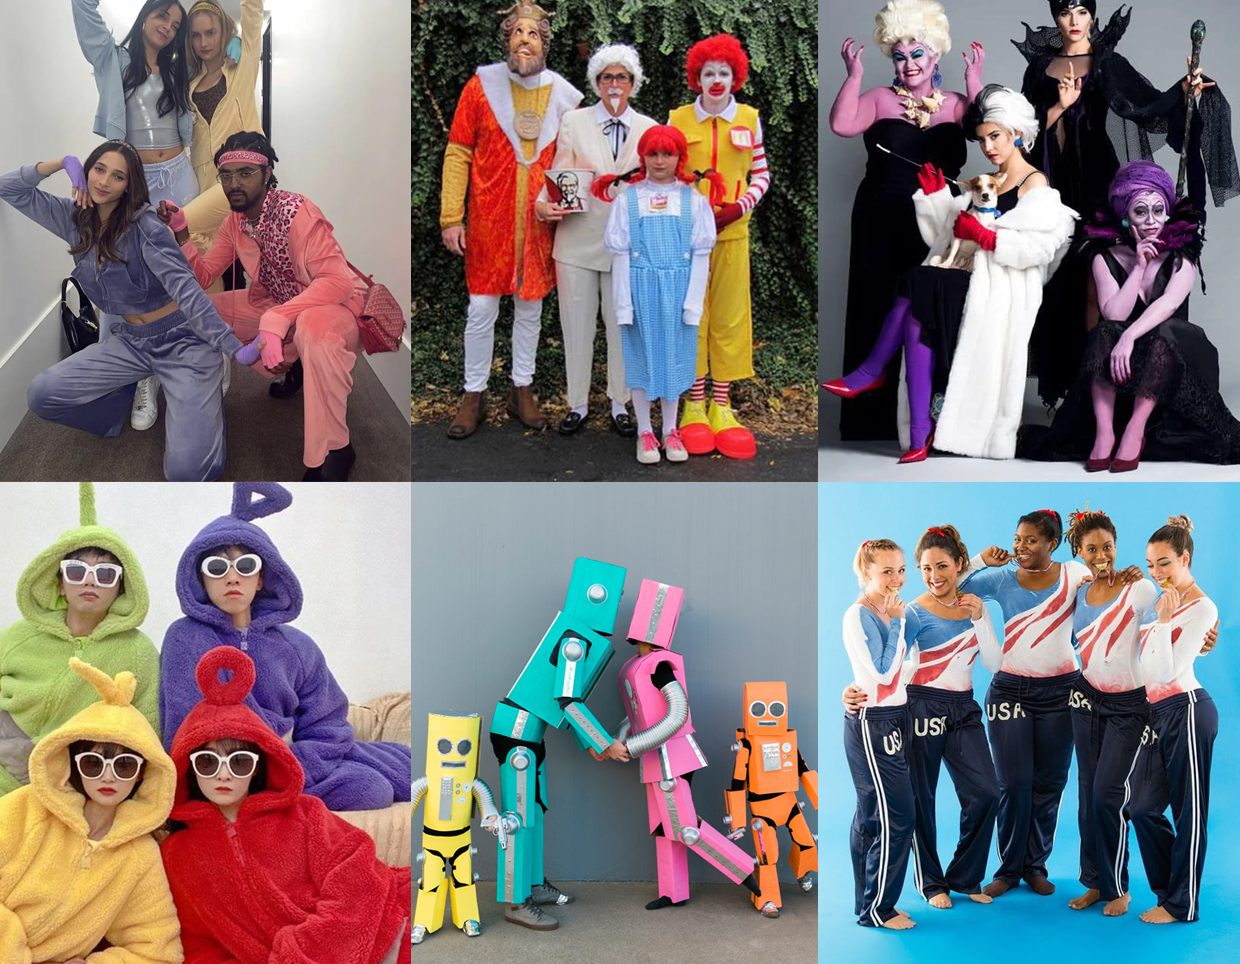 21 of the best group Halloween costumes - Gathered